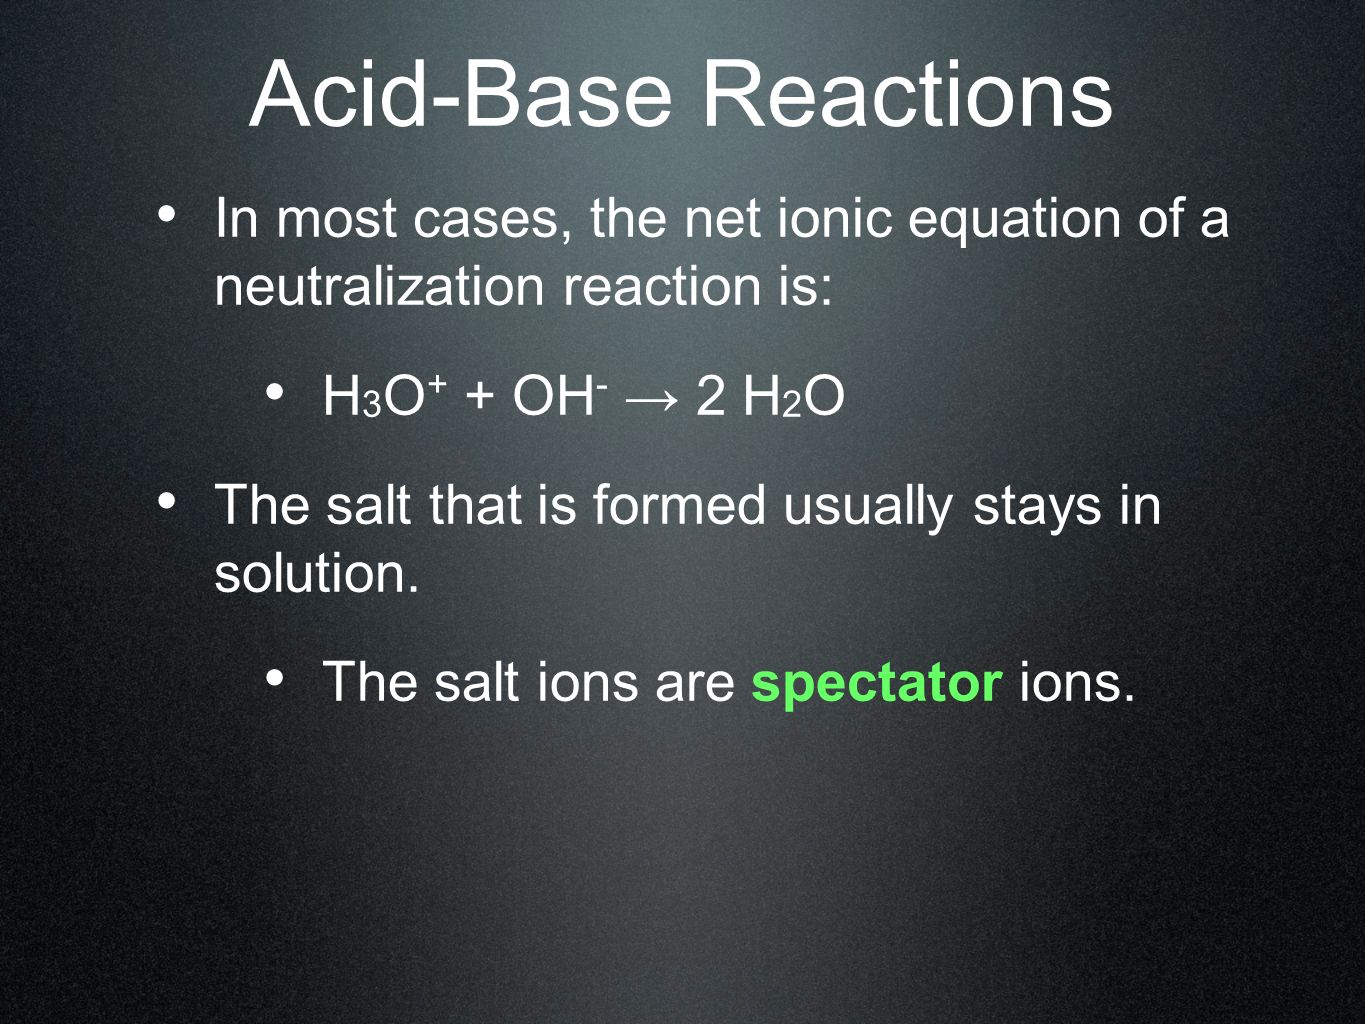 Acid-Base Reactions In most cases, the net ionic equation of a neutralization reaction is: H3O+ + OH- → 2 H2O.